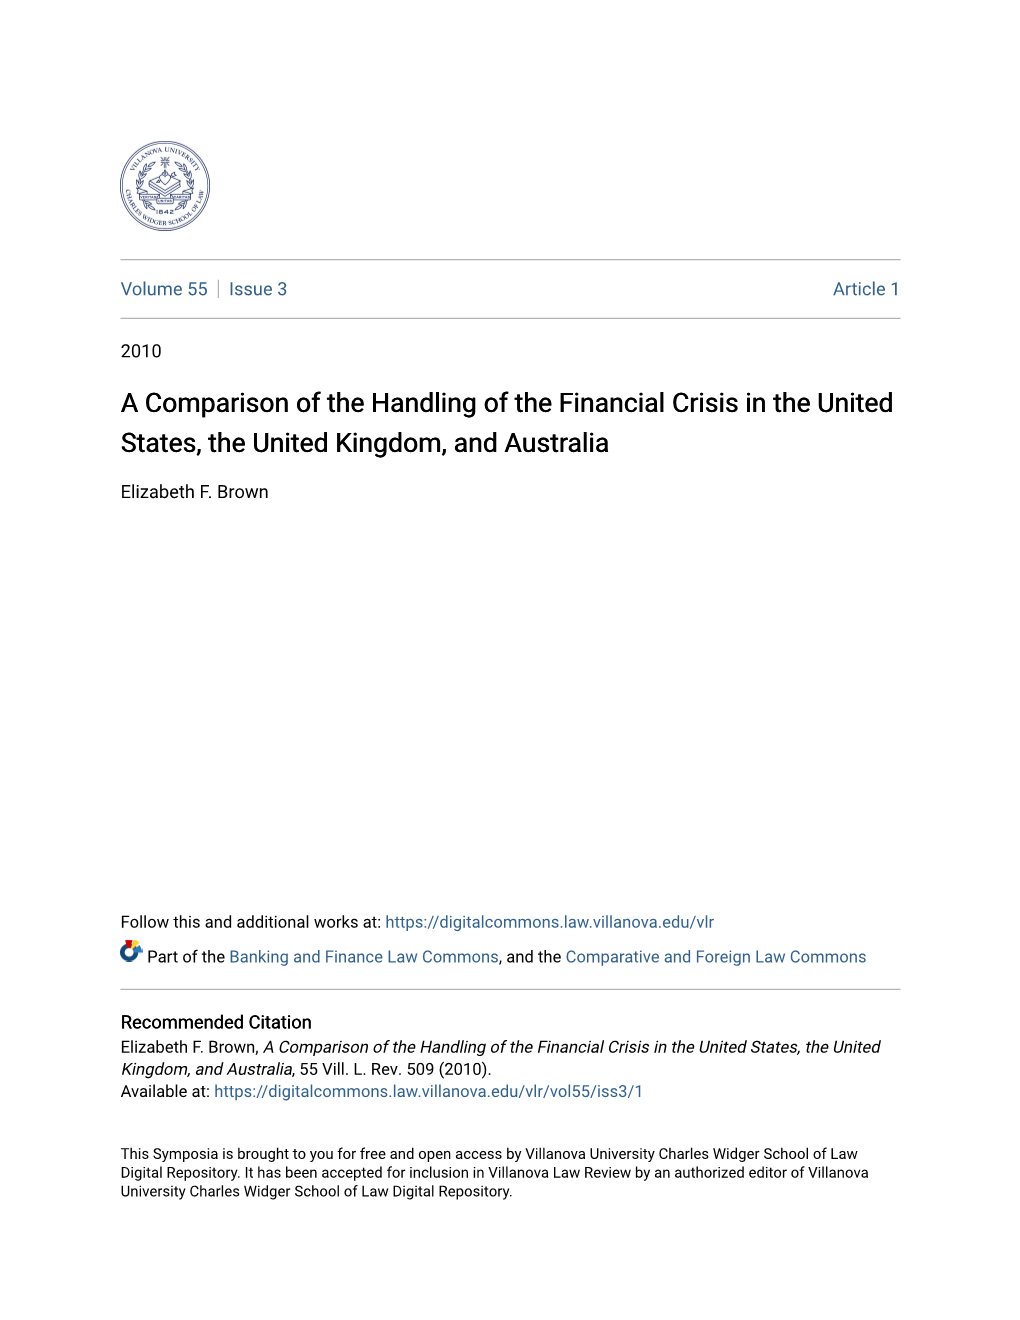 A Comparison of the Handling of the Financial Crisis in the United States, the United Kingdom, and Australia